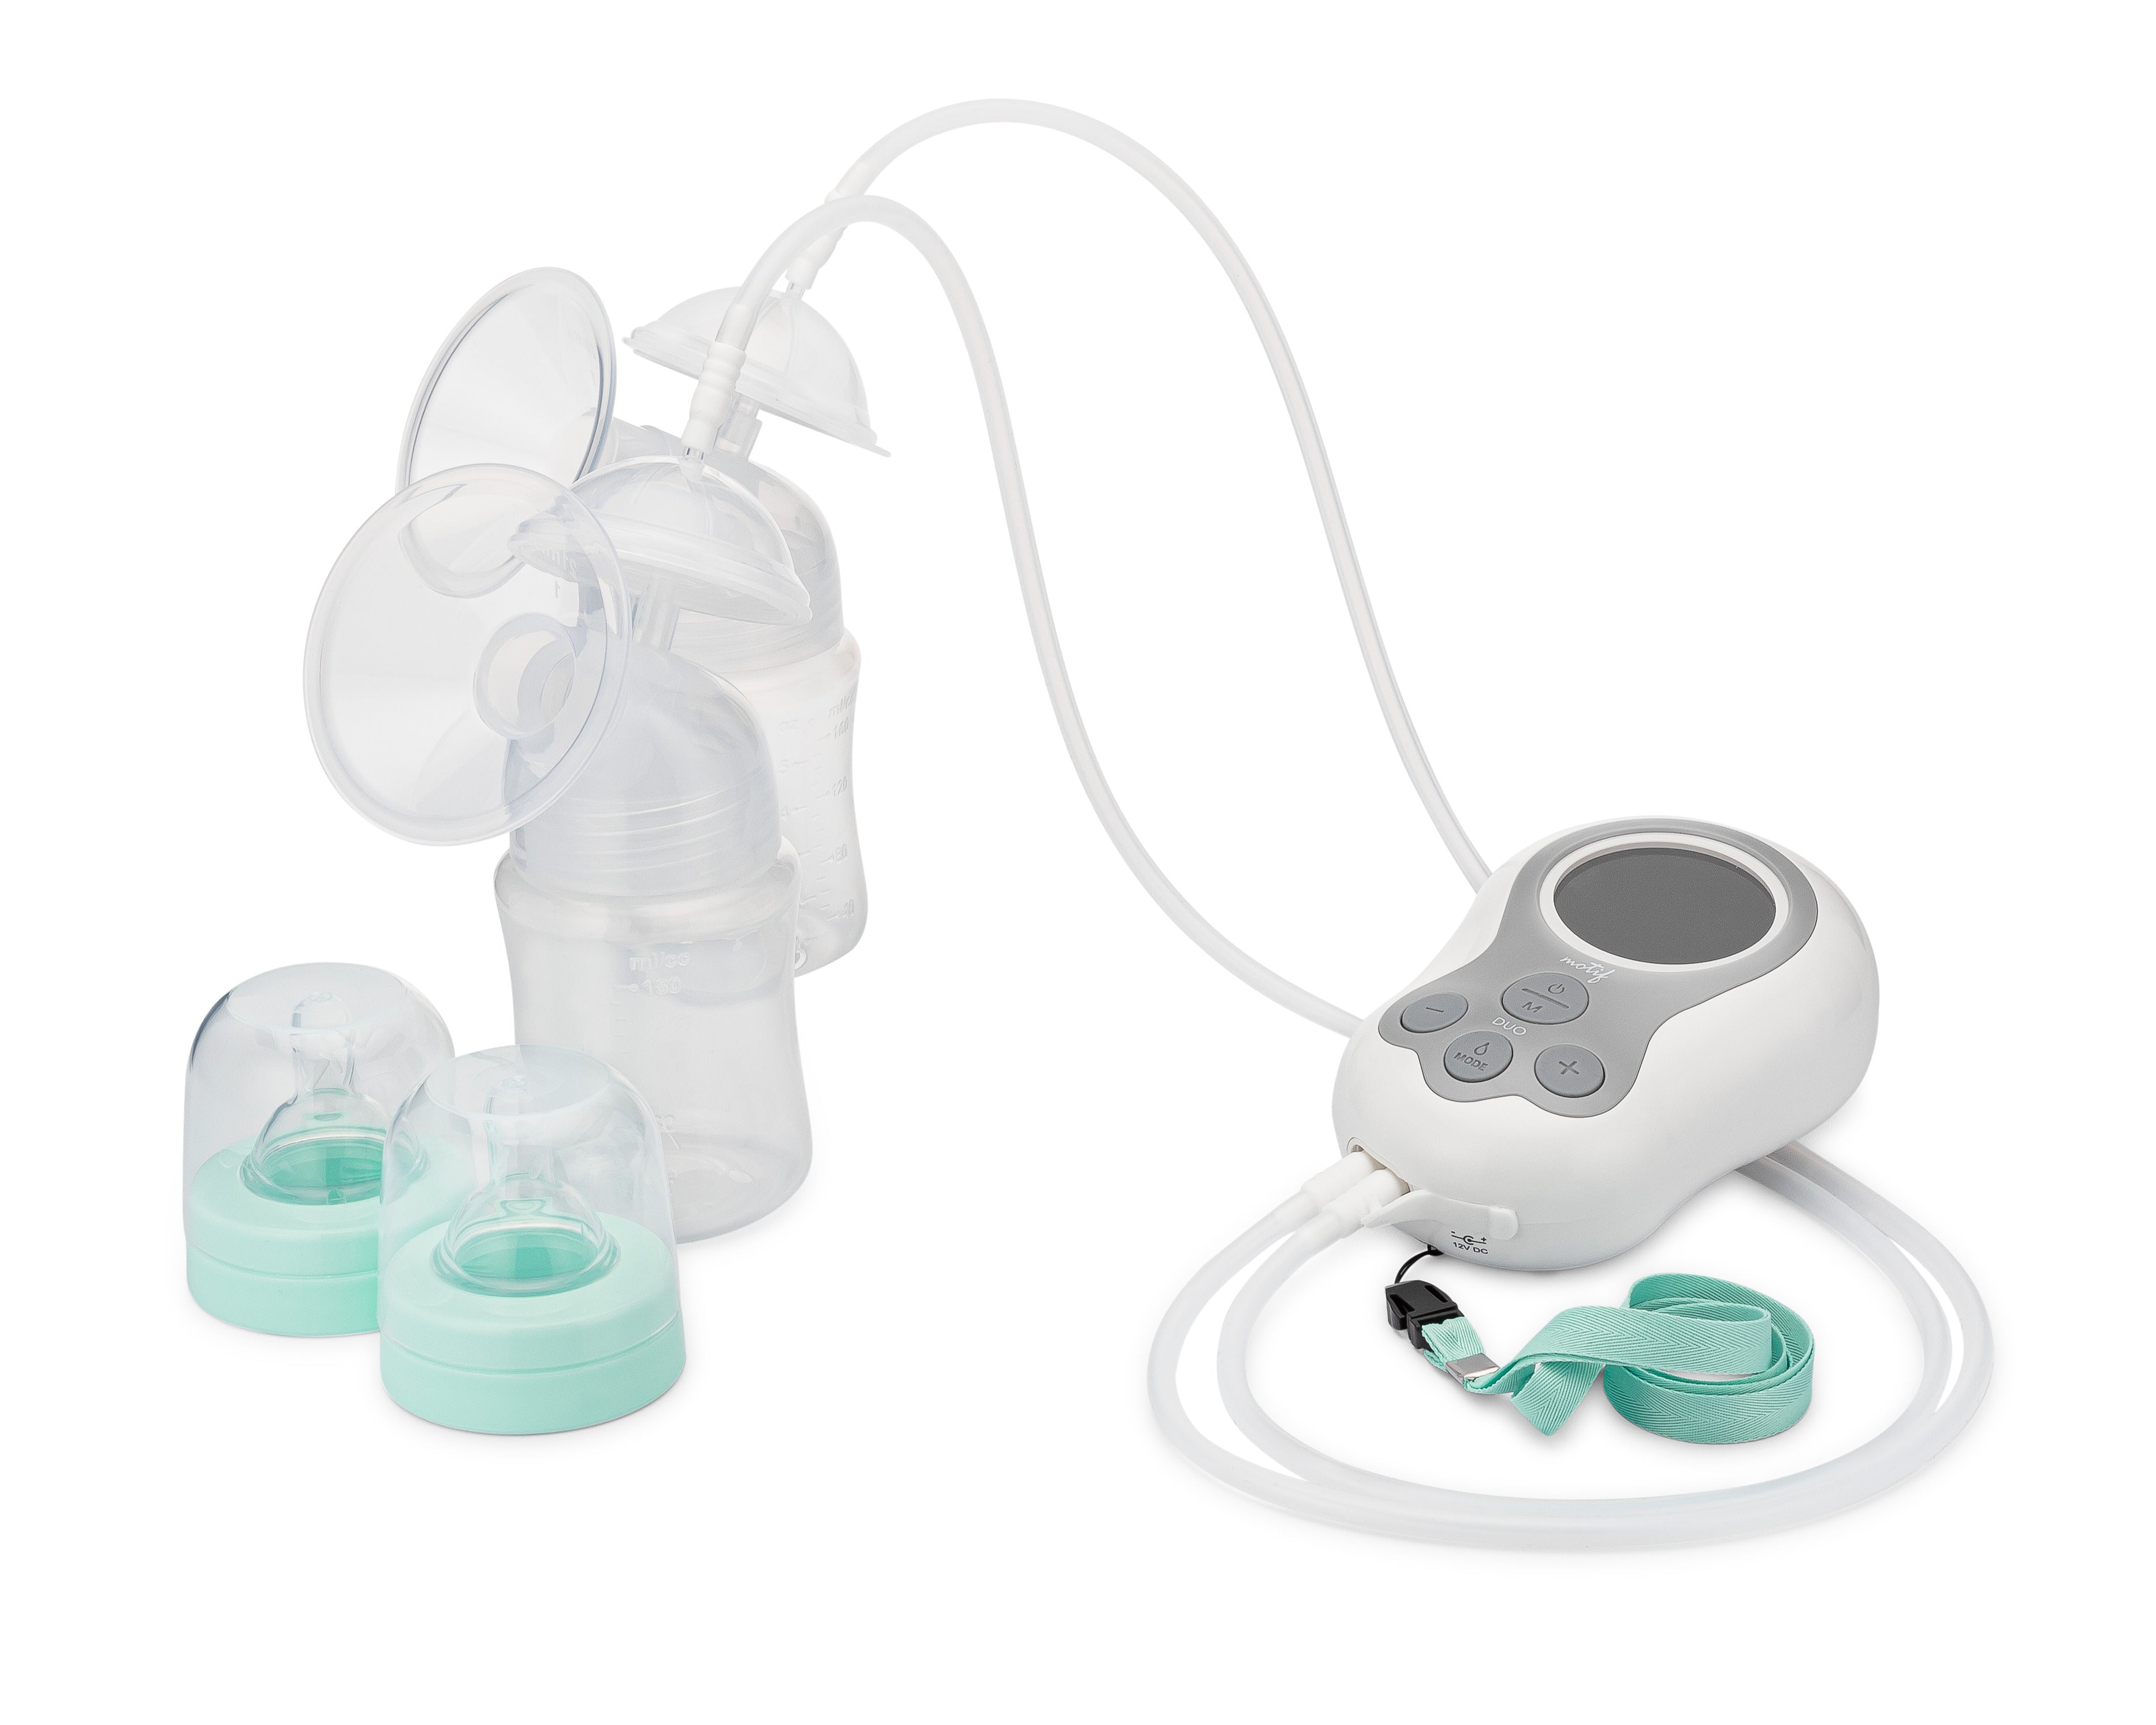 Motif Medical Duo Double Electric Breast Pump handheld unit with teal strap, two bottles and flanges and nipples, caps and rings